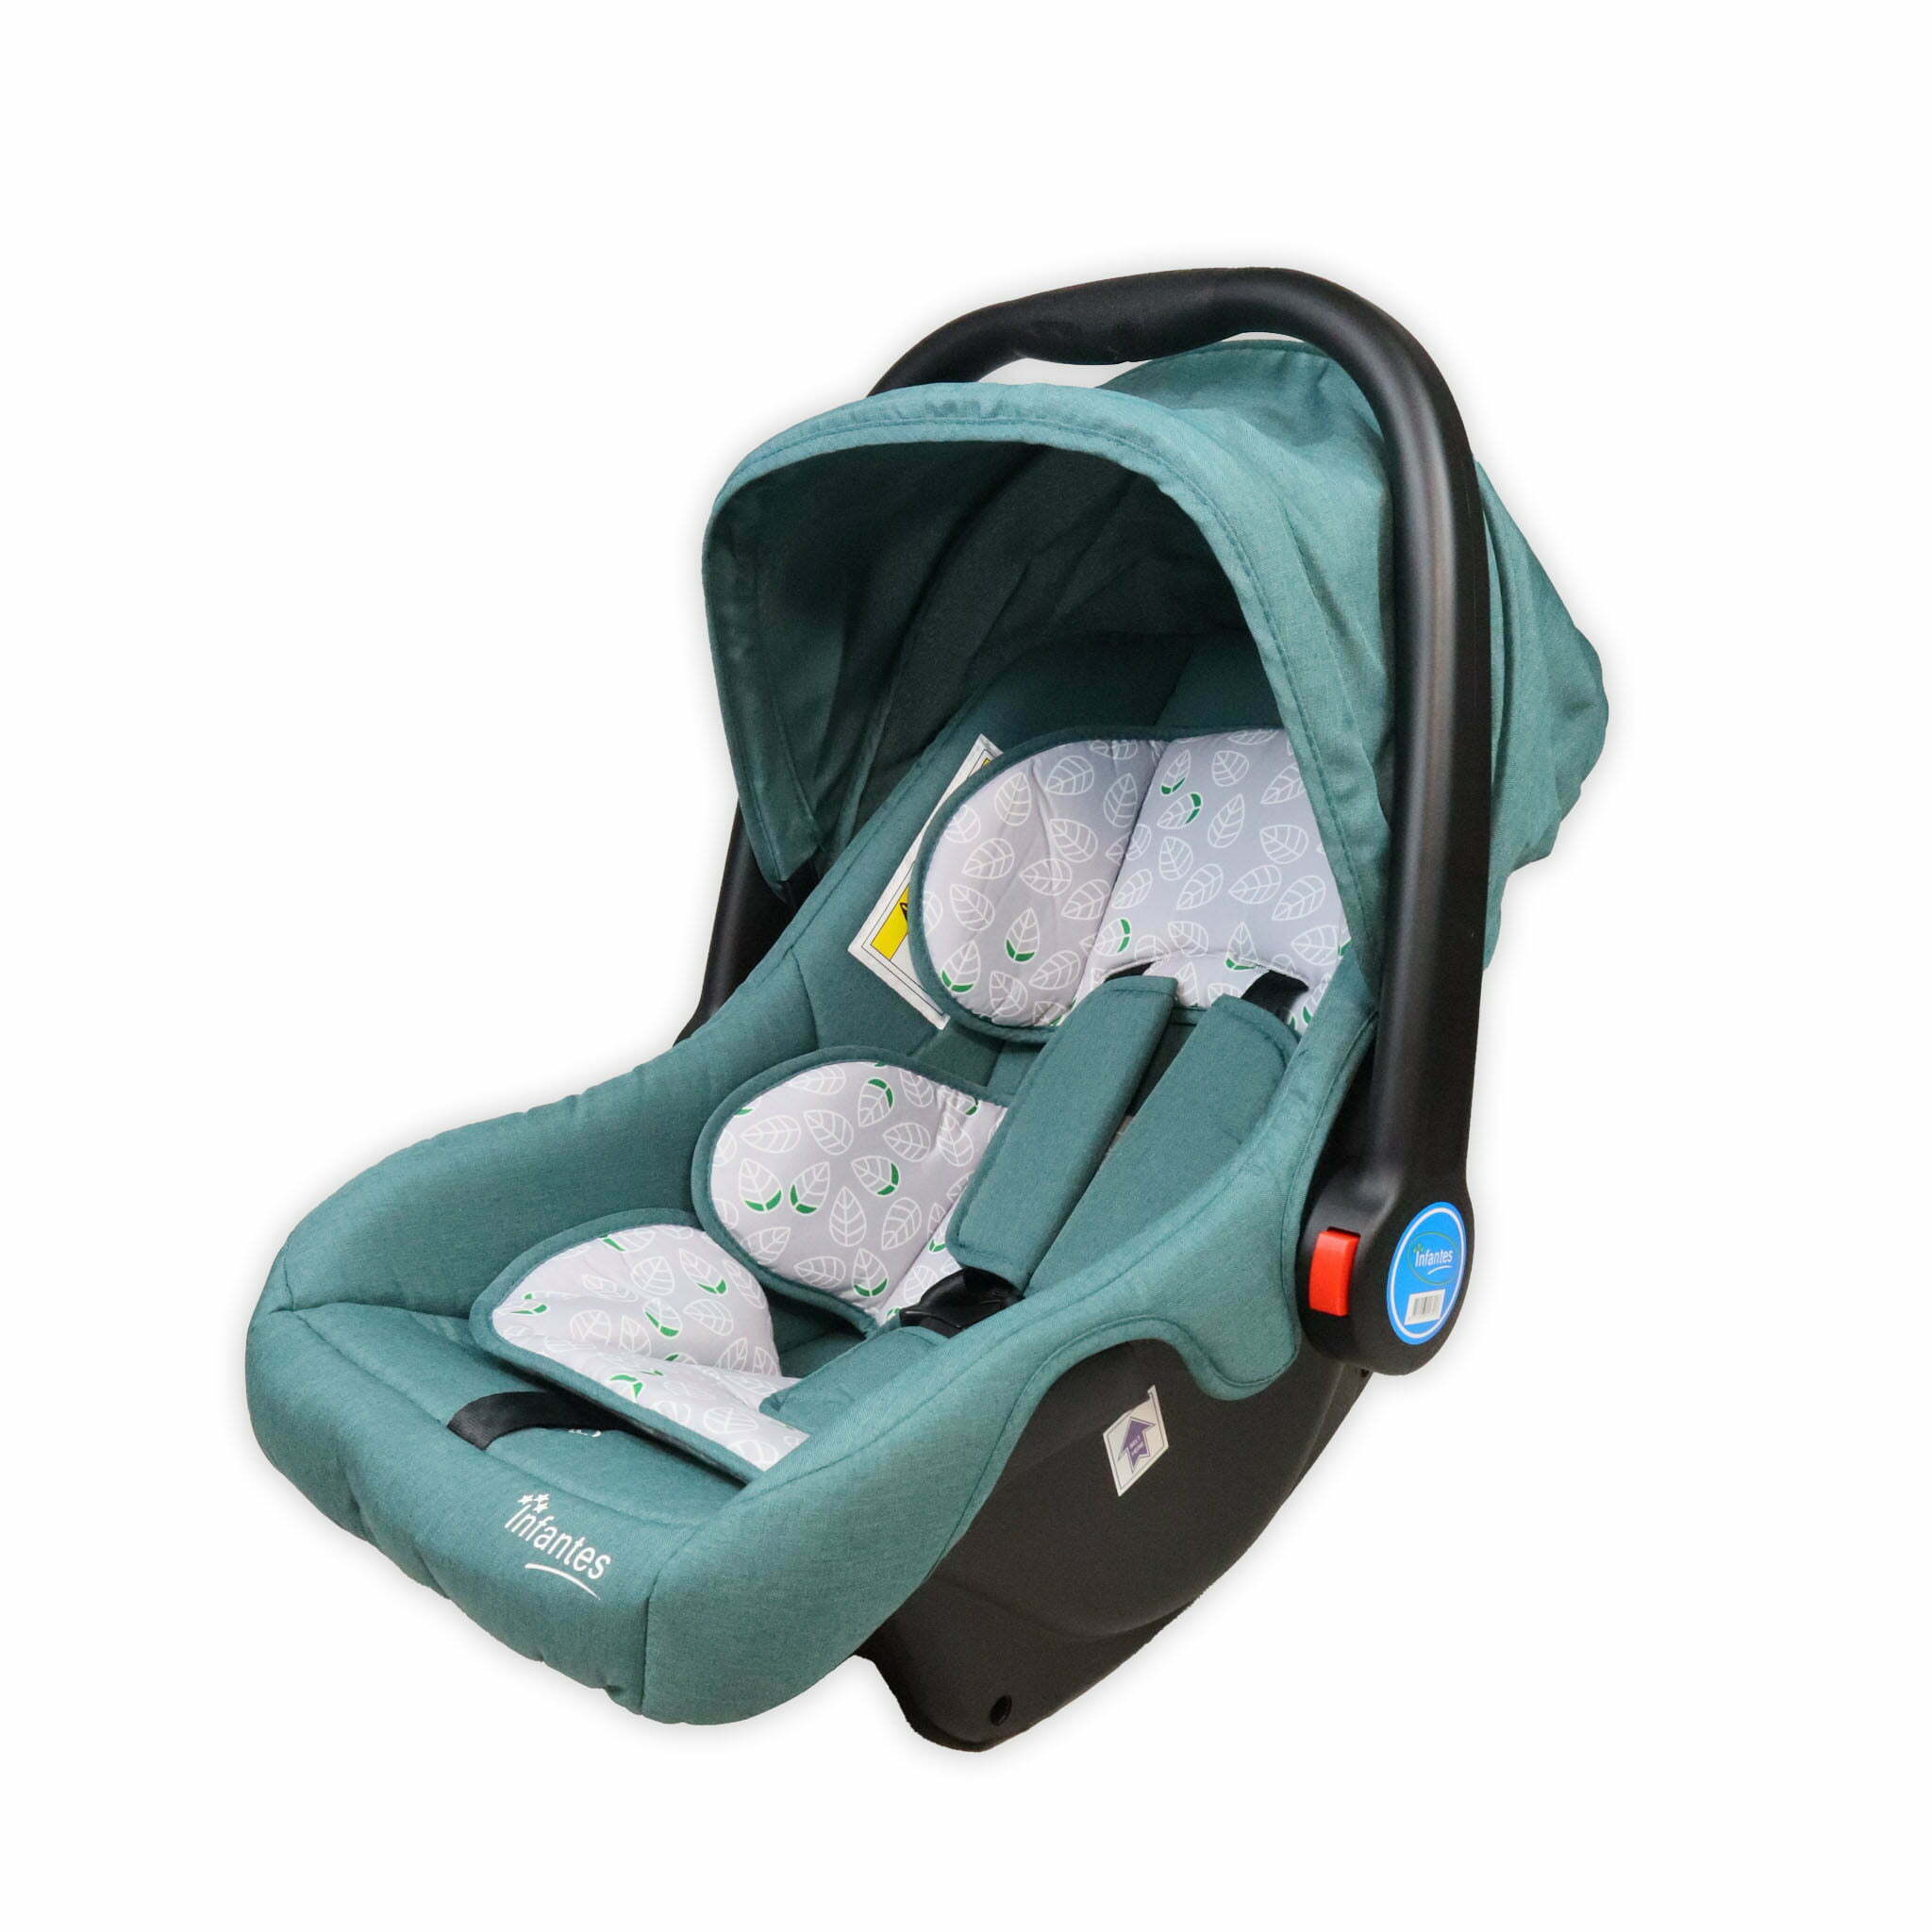 Infantes Carry cot & Car seat Green 324